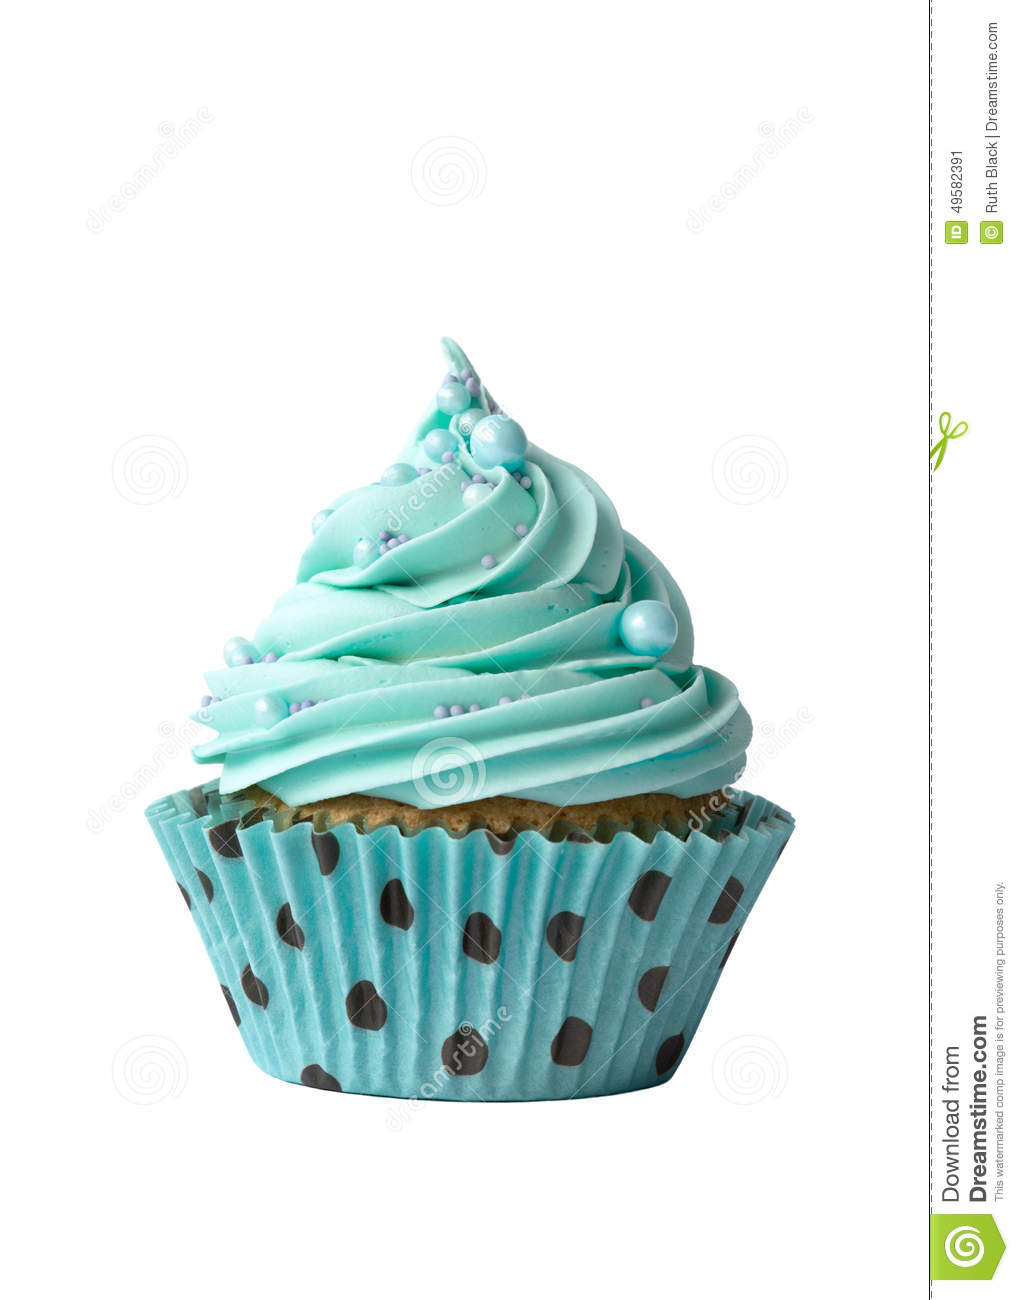 Turquoise and White Cupcakes